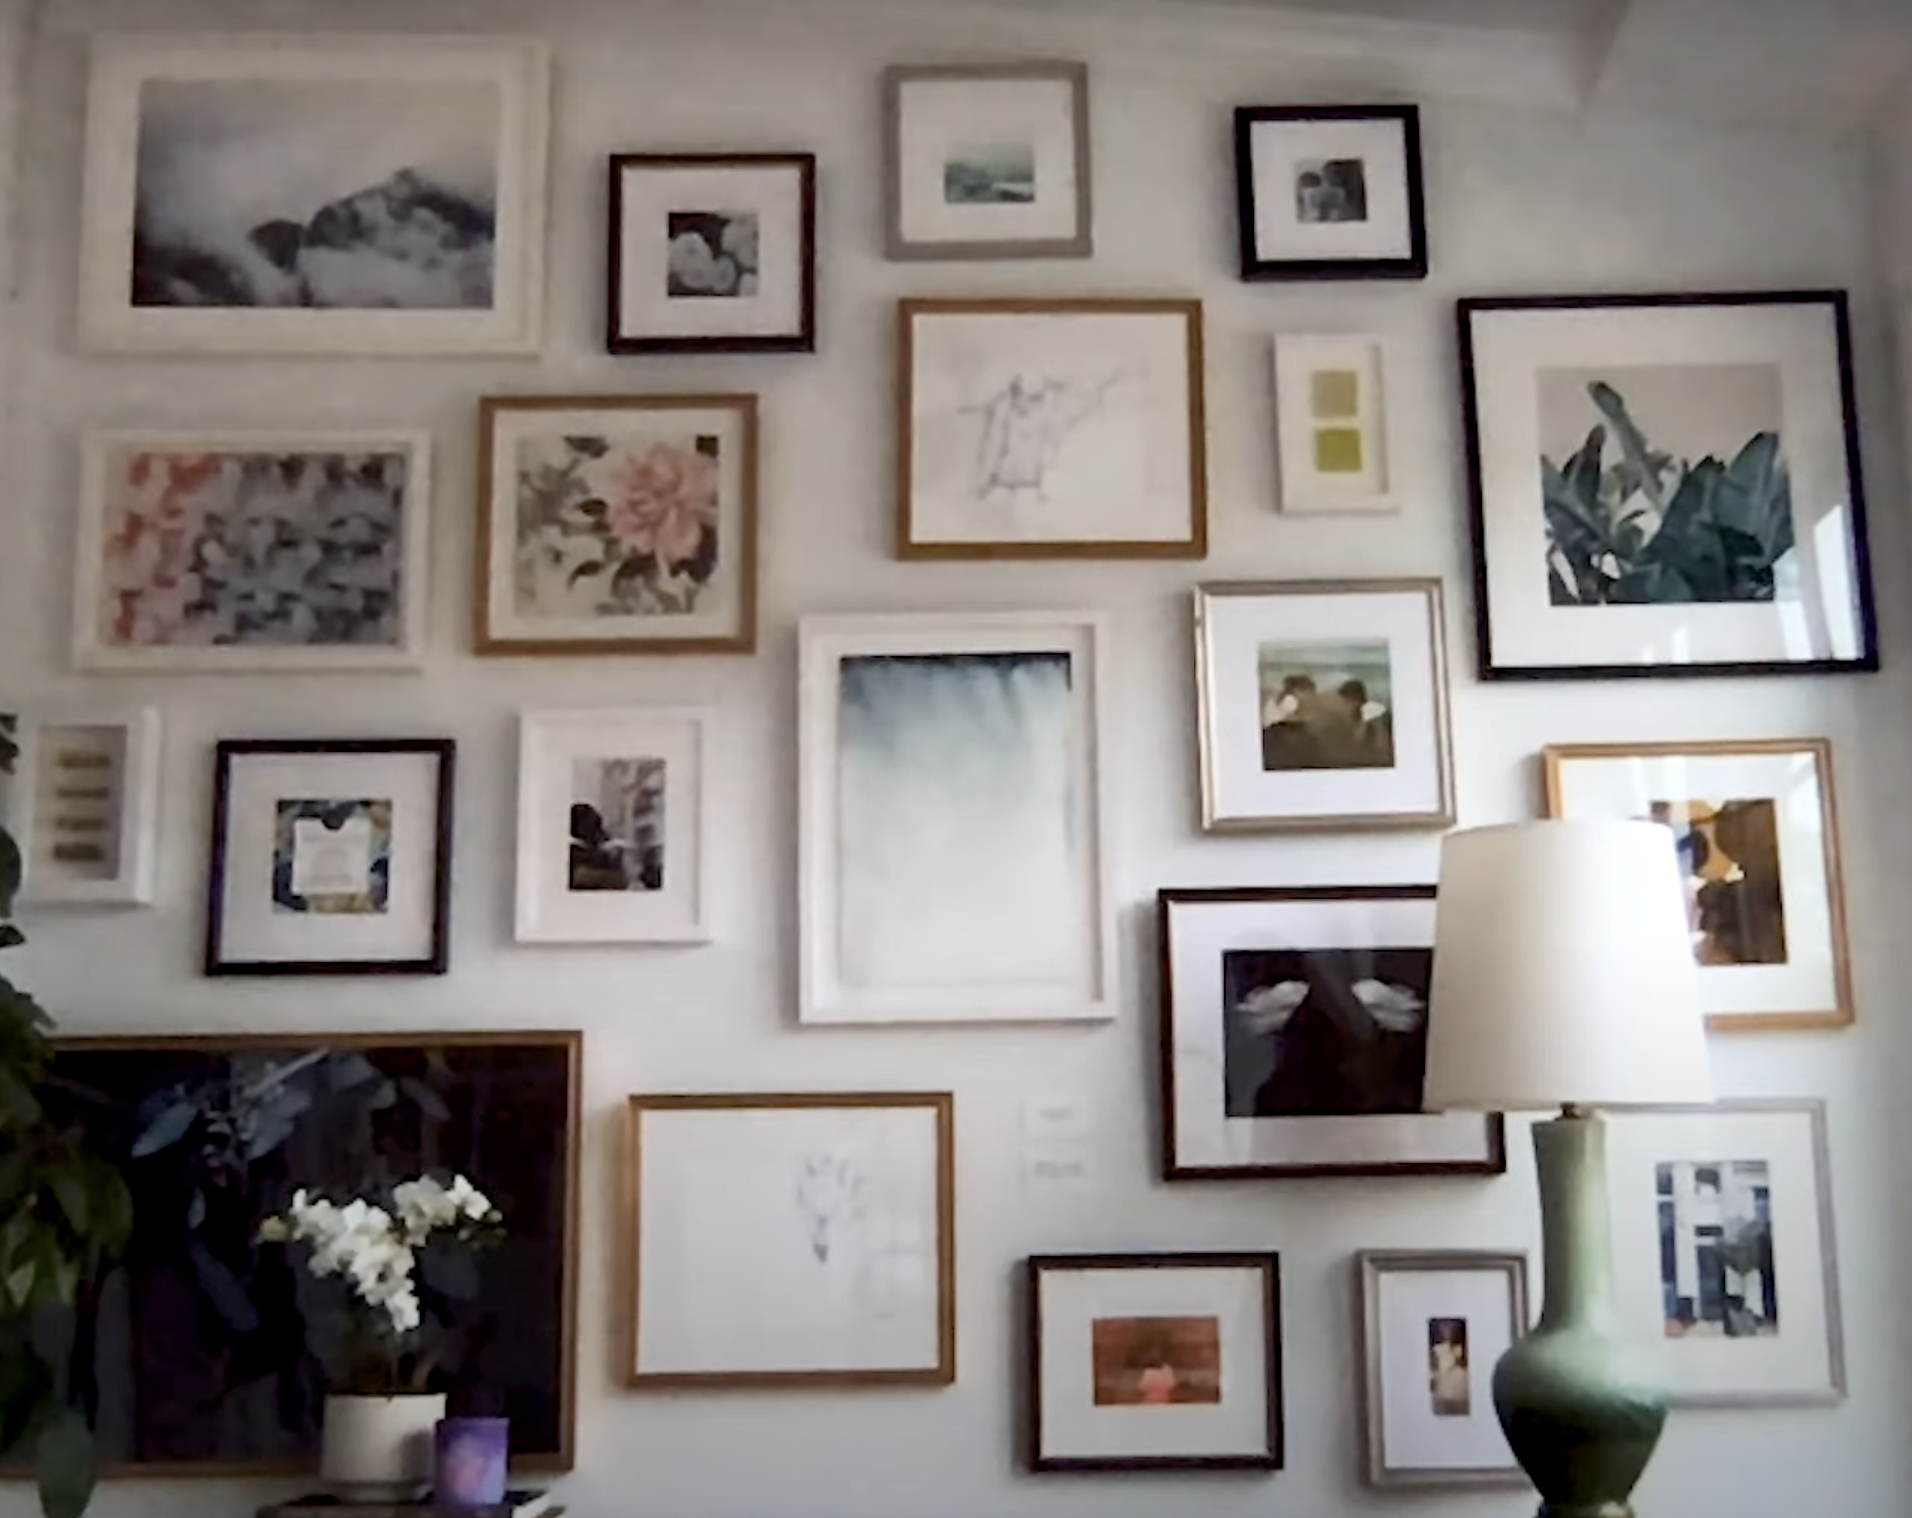 Large gallery wall against a white painted wall